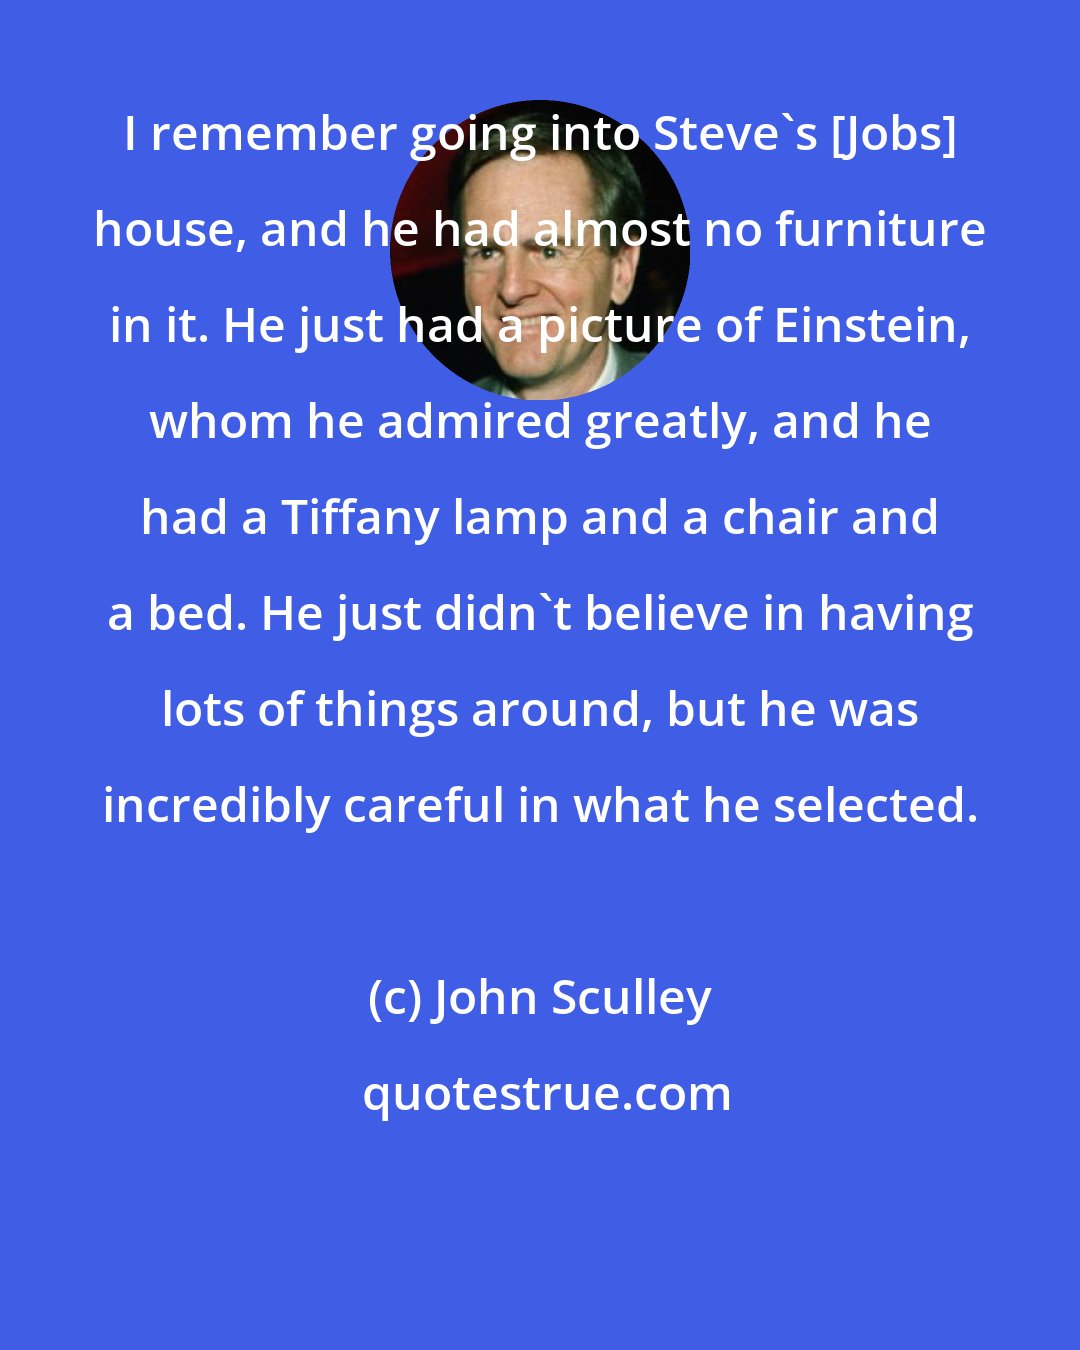 John Sculley: I remember going into Steve's [Jobs] house, and he had almost no furniture in it. He just had a picture of Einstein, whom he admired greatly, and he had a Tiffany lamp and a chair and a bed. He just didn't believe in having lots of things around, but he was incredibly careful in what he selected.